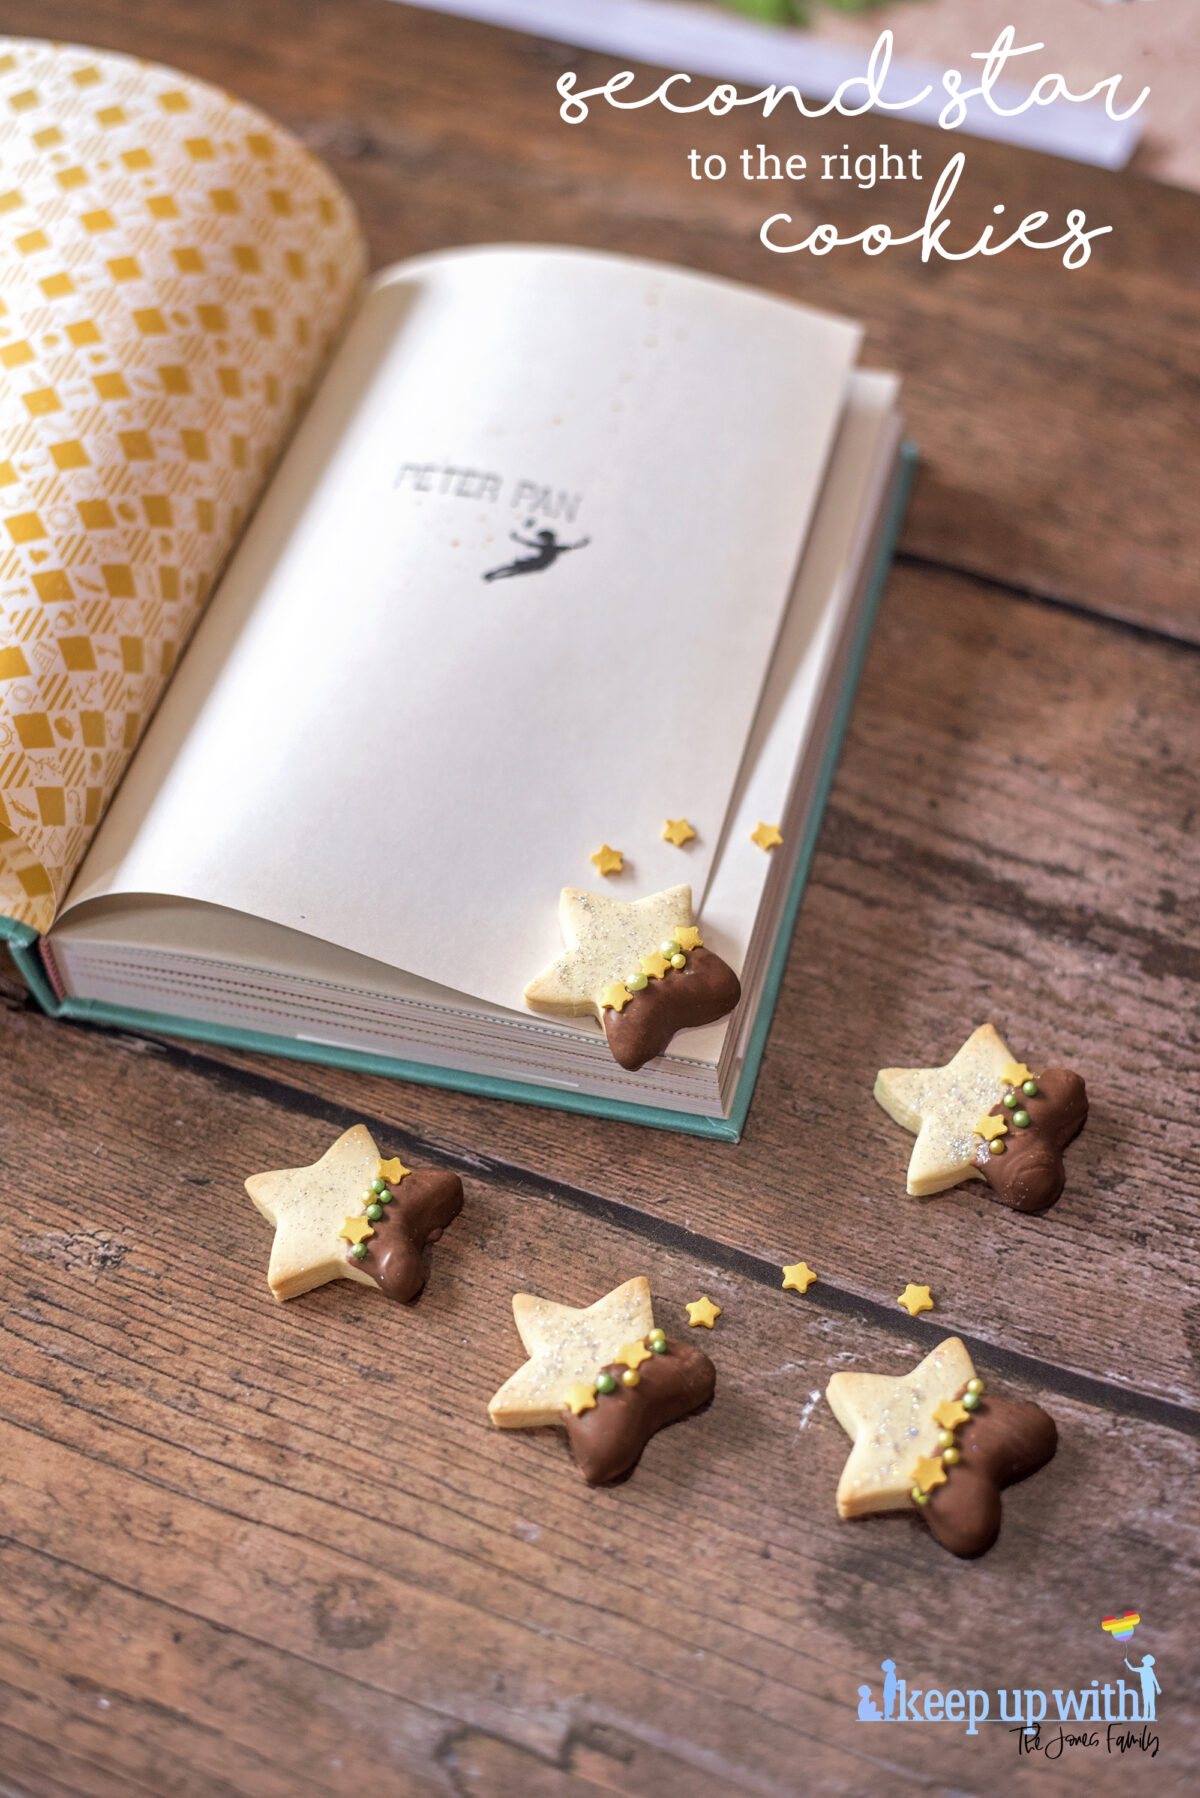 Image shows a wooden tabletop with a copy of J M Barrie's Peter Pan open. On the book pages and the table are small star shaped biscuits. Half of each Peter Pan Second Star to the Right biscuit is dipped in chocolate and  the other is sprinkled with silver edible glitter.  The dividing line is decorated with yellow star sprinkles and green pearl shaped sprinkles. Image by Keep Up With The Jones Family